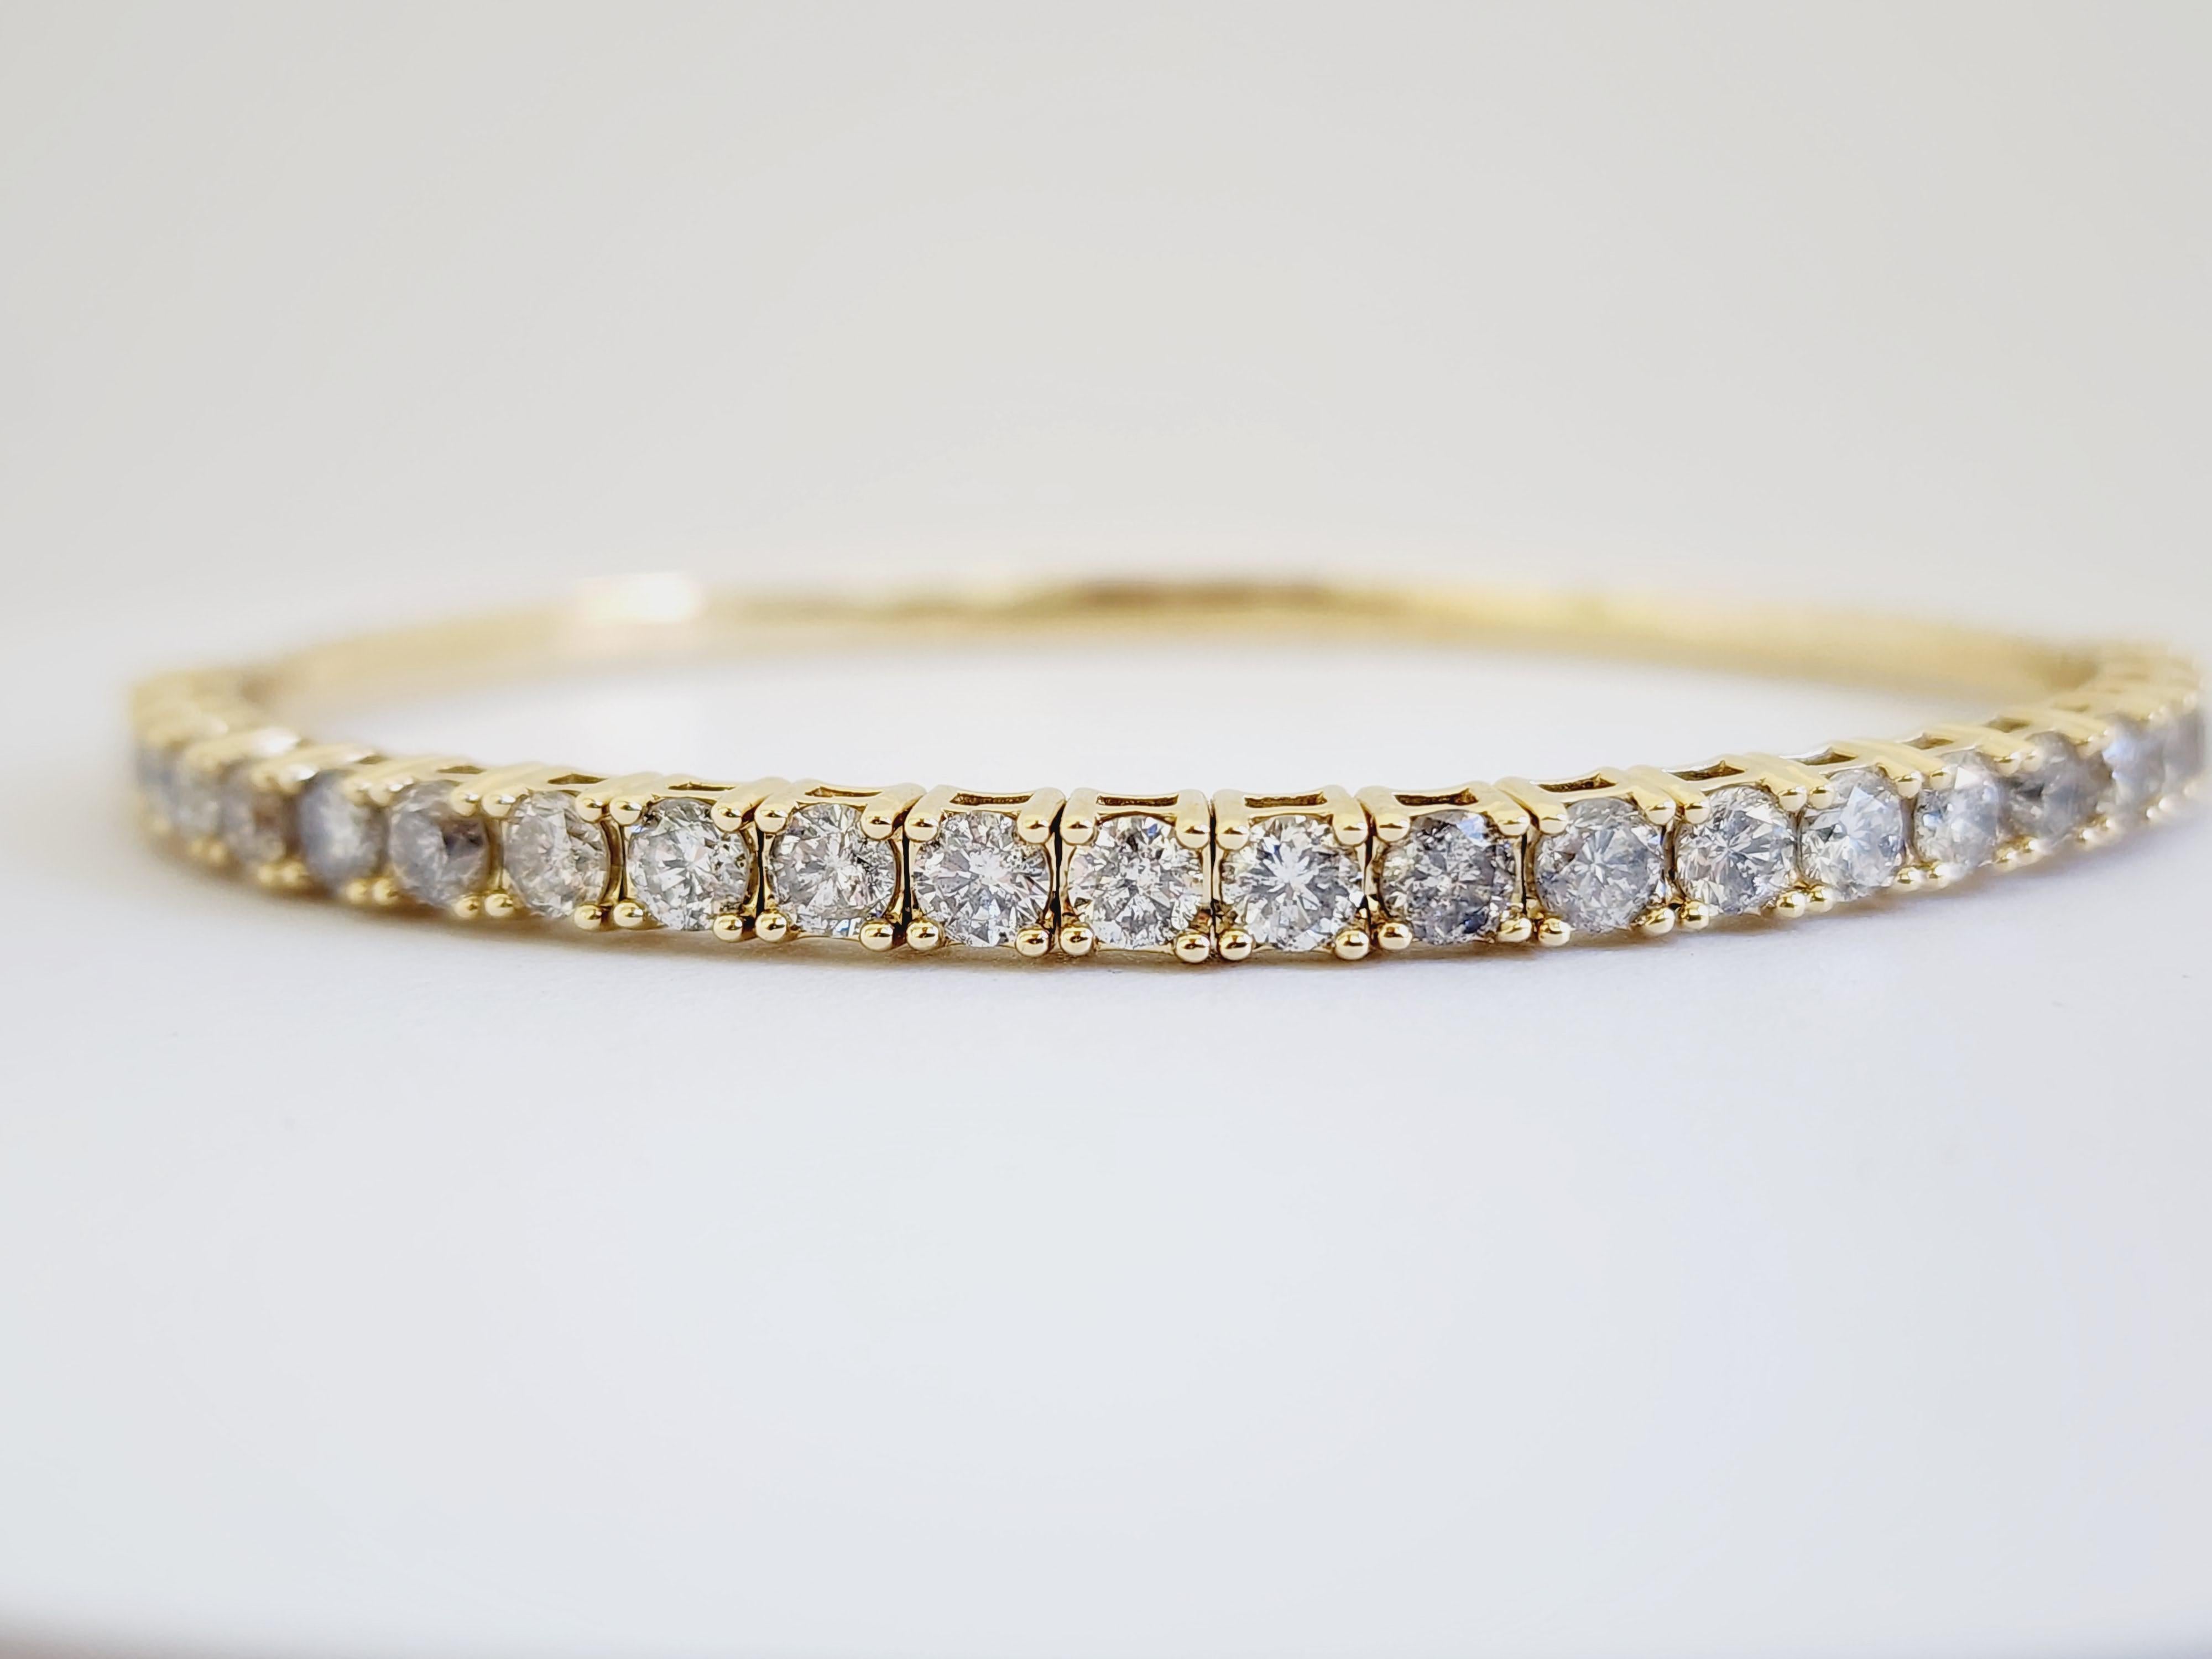 Natural Diamonds 3.75 ctw flexible halfway around bangle yellow gold 14k.
Average Color G Clarity I, 3.80 mm wide.  7 Inch. 